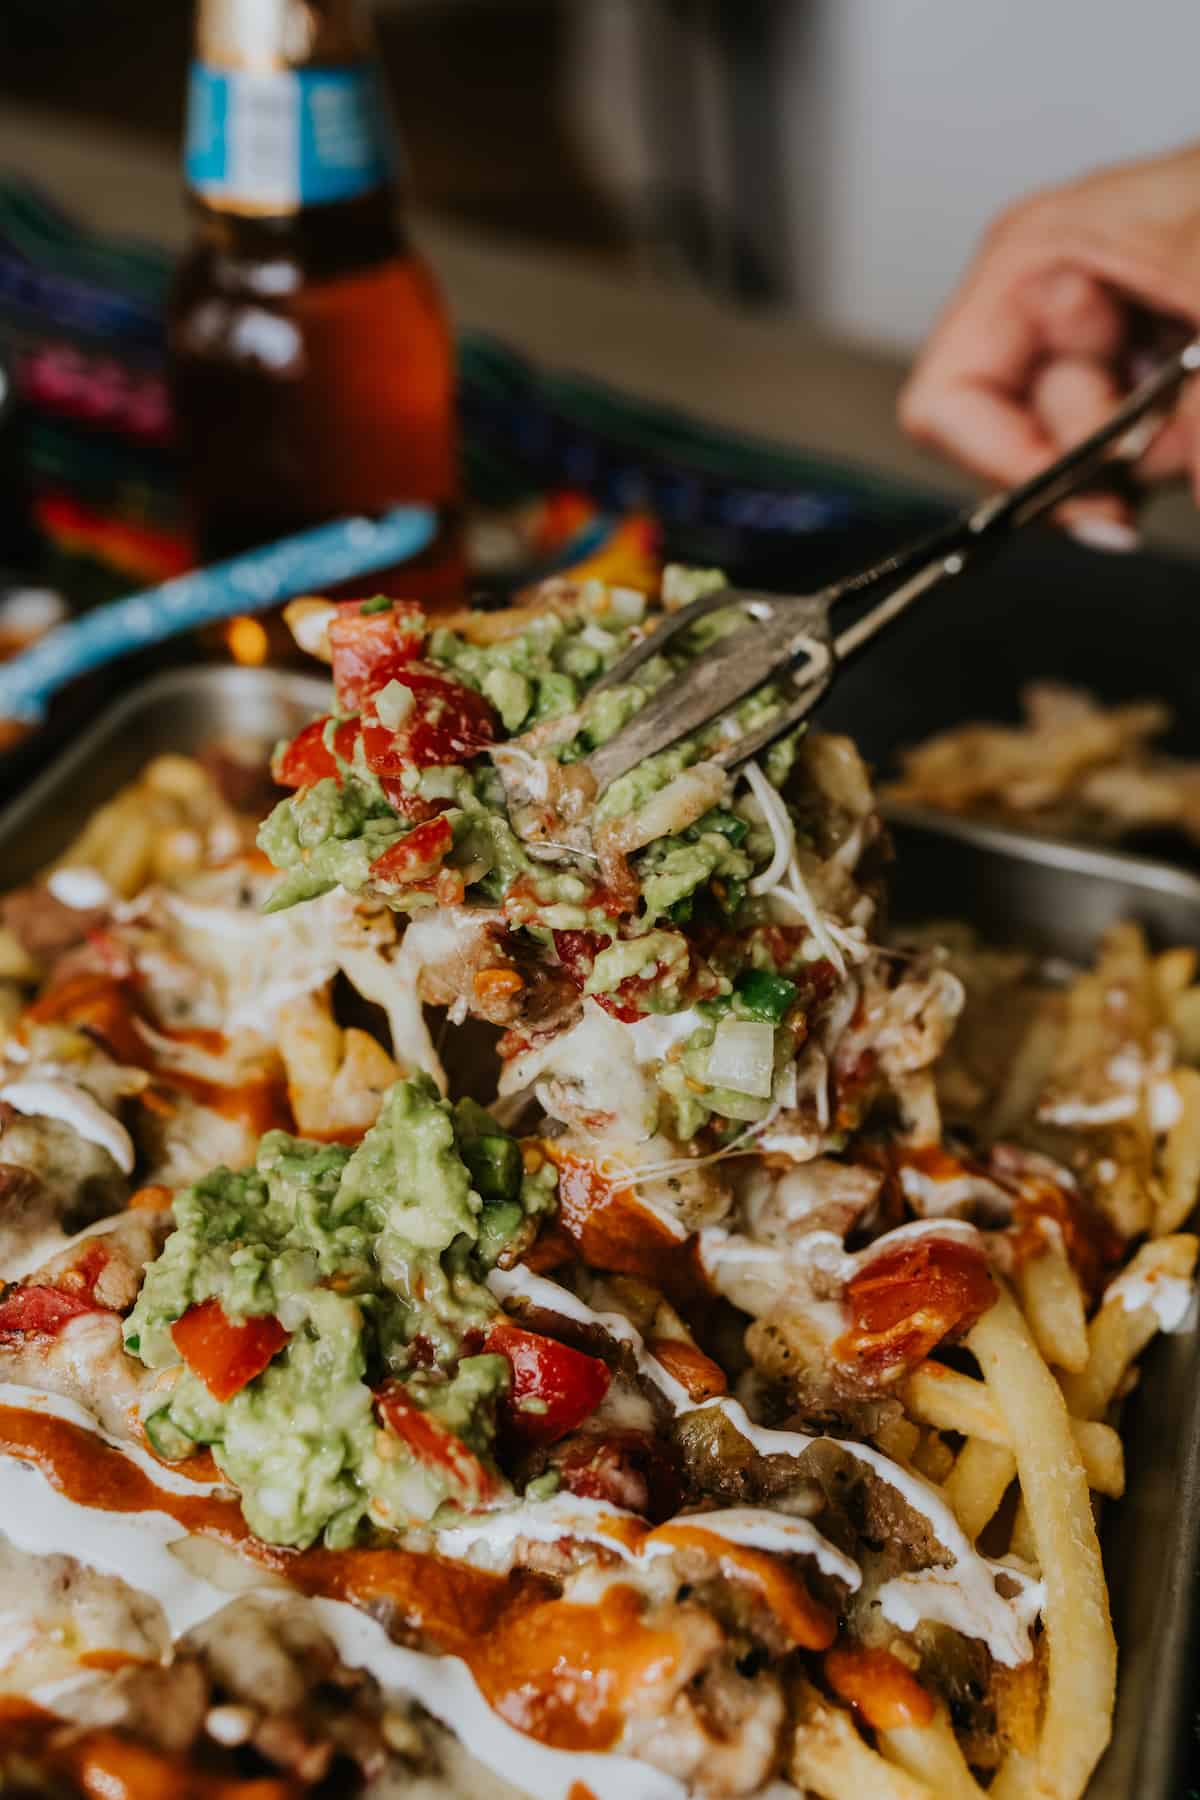 loaded fries being served using vintage tongs. Toppings include guacamole and salsa ad melted cheese.